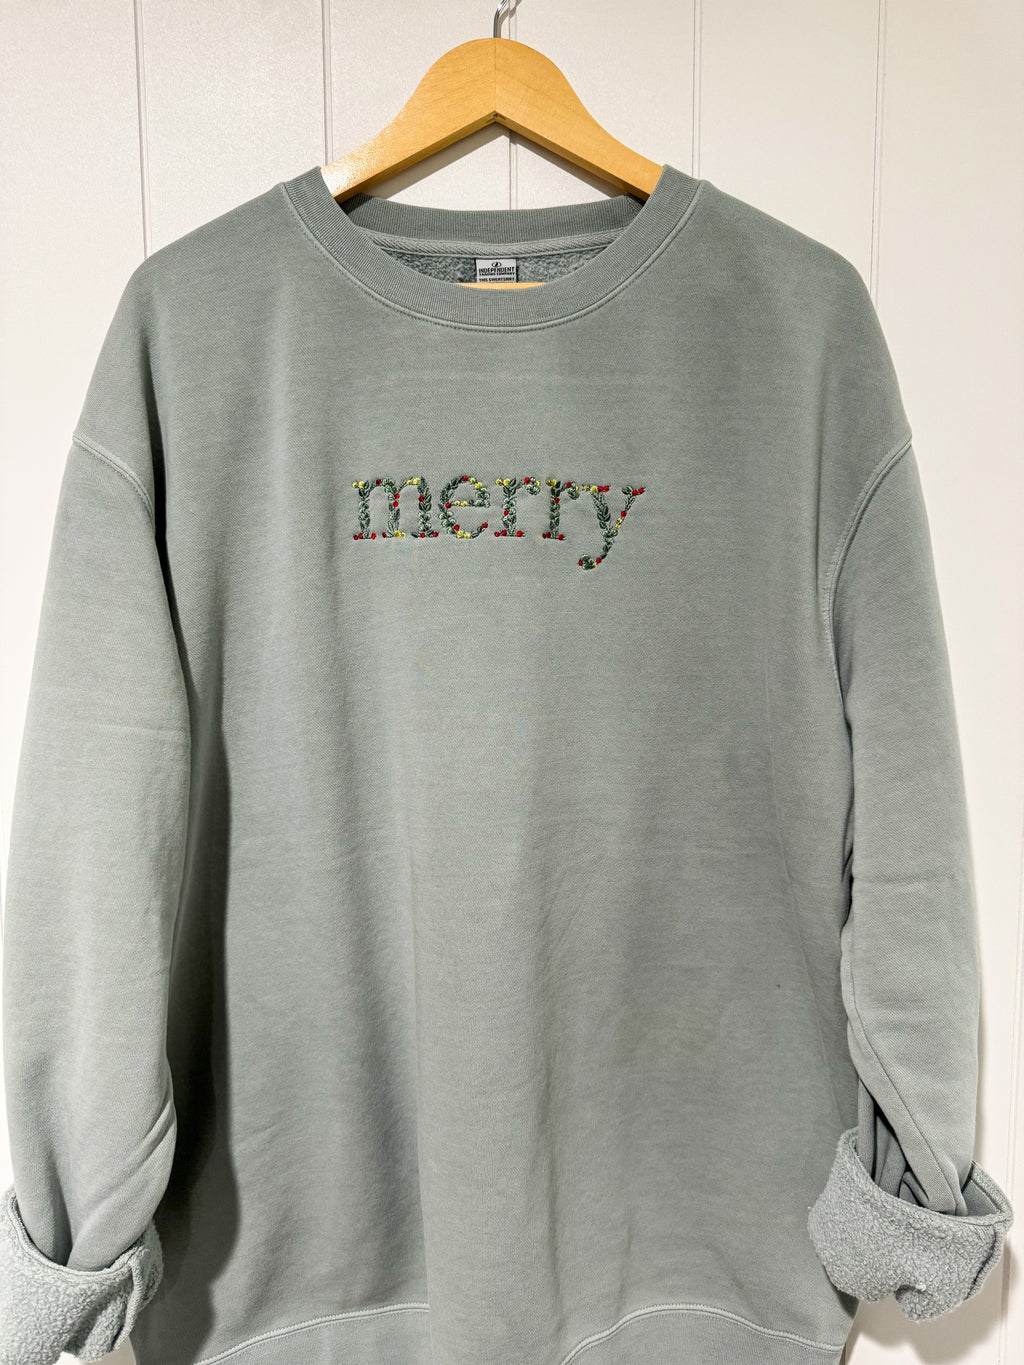 Merry Floral Embroidered Sweatshirt